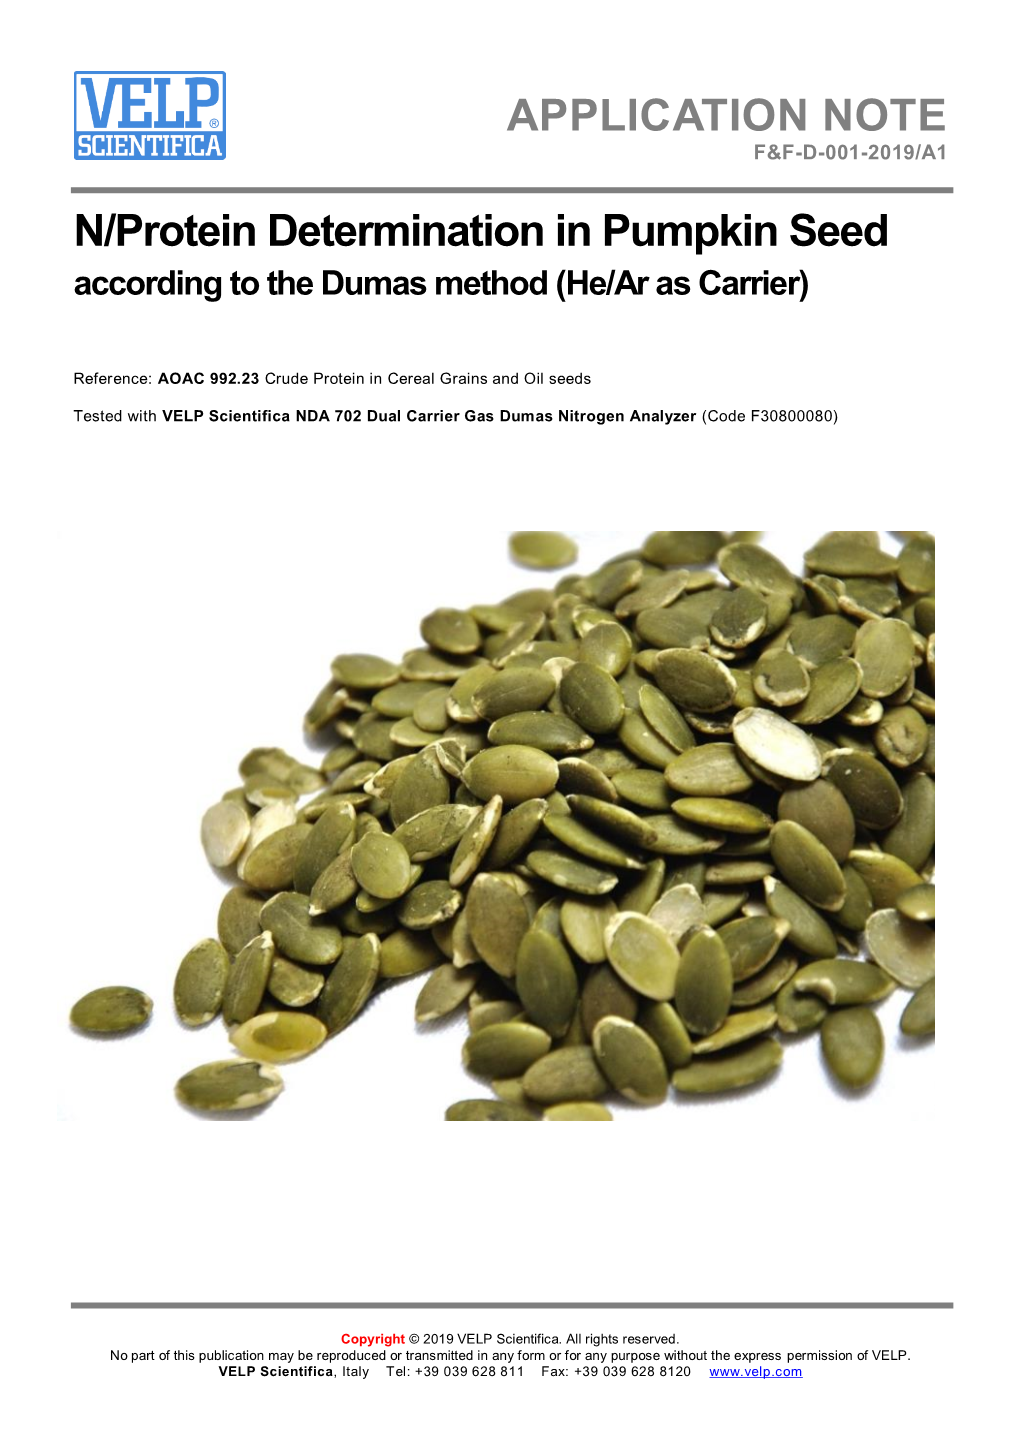 N/Protein Determination in Pumpkin Seed According to the Dumas Method (He/Ar As Carrier)